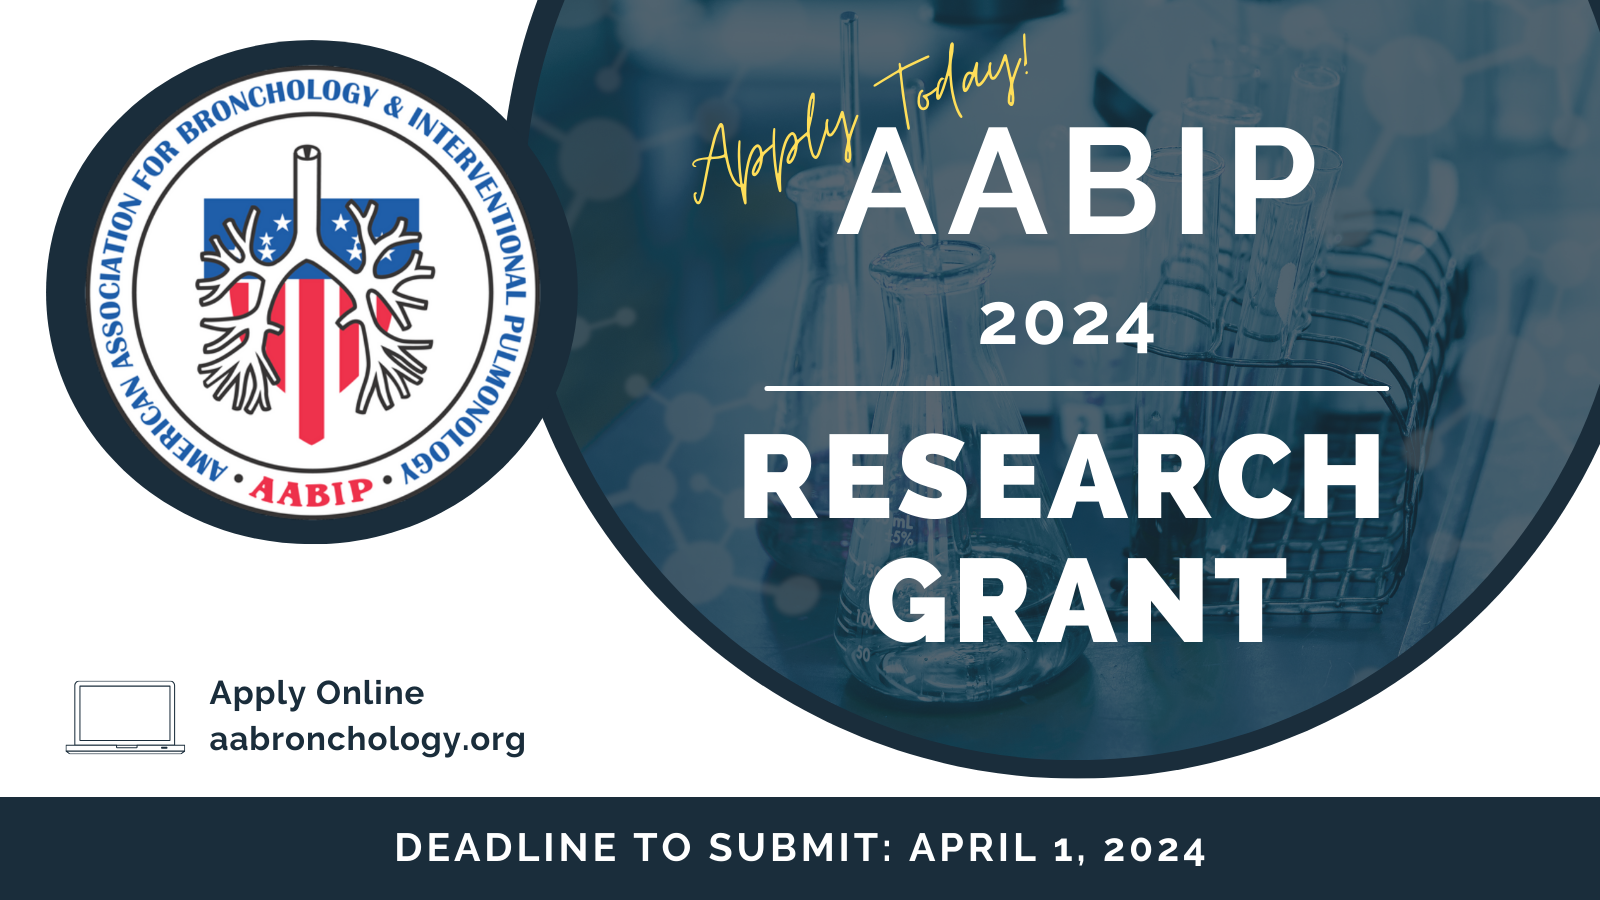 AABIP Research Grant